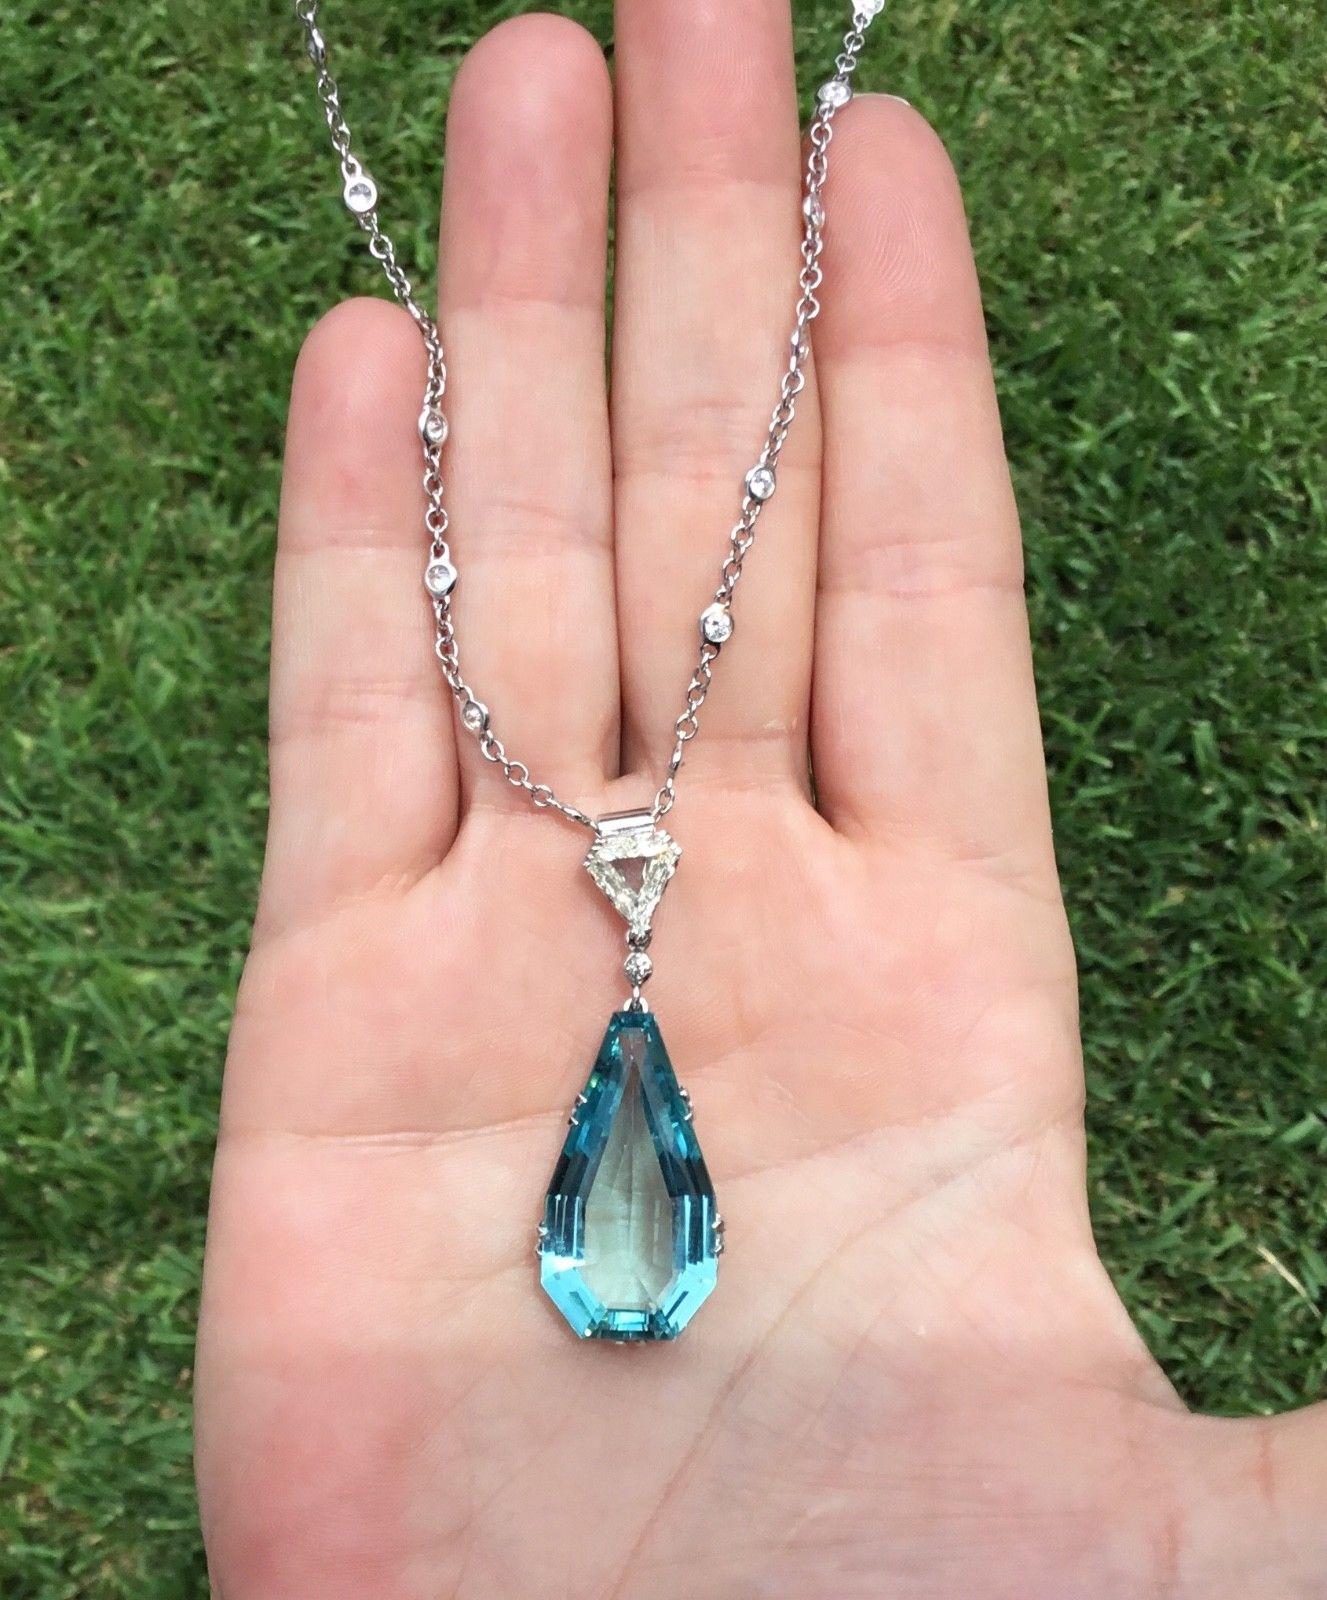 Estate Antique 18K White Gold 20.08 CTW Natural Aquamarine & Diamond Necklace

One Pear Shaped Natural Aquamarine, 
Weighing Approximately 17.30 Carat Total Weight.


One Cut Corned Trillion Shaped Natural Diamond, 
Weighing Approximately 1.50 Carat